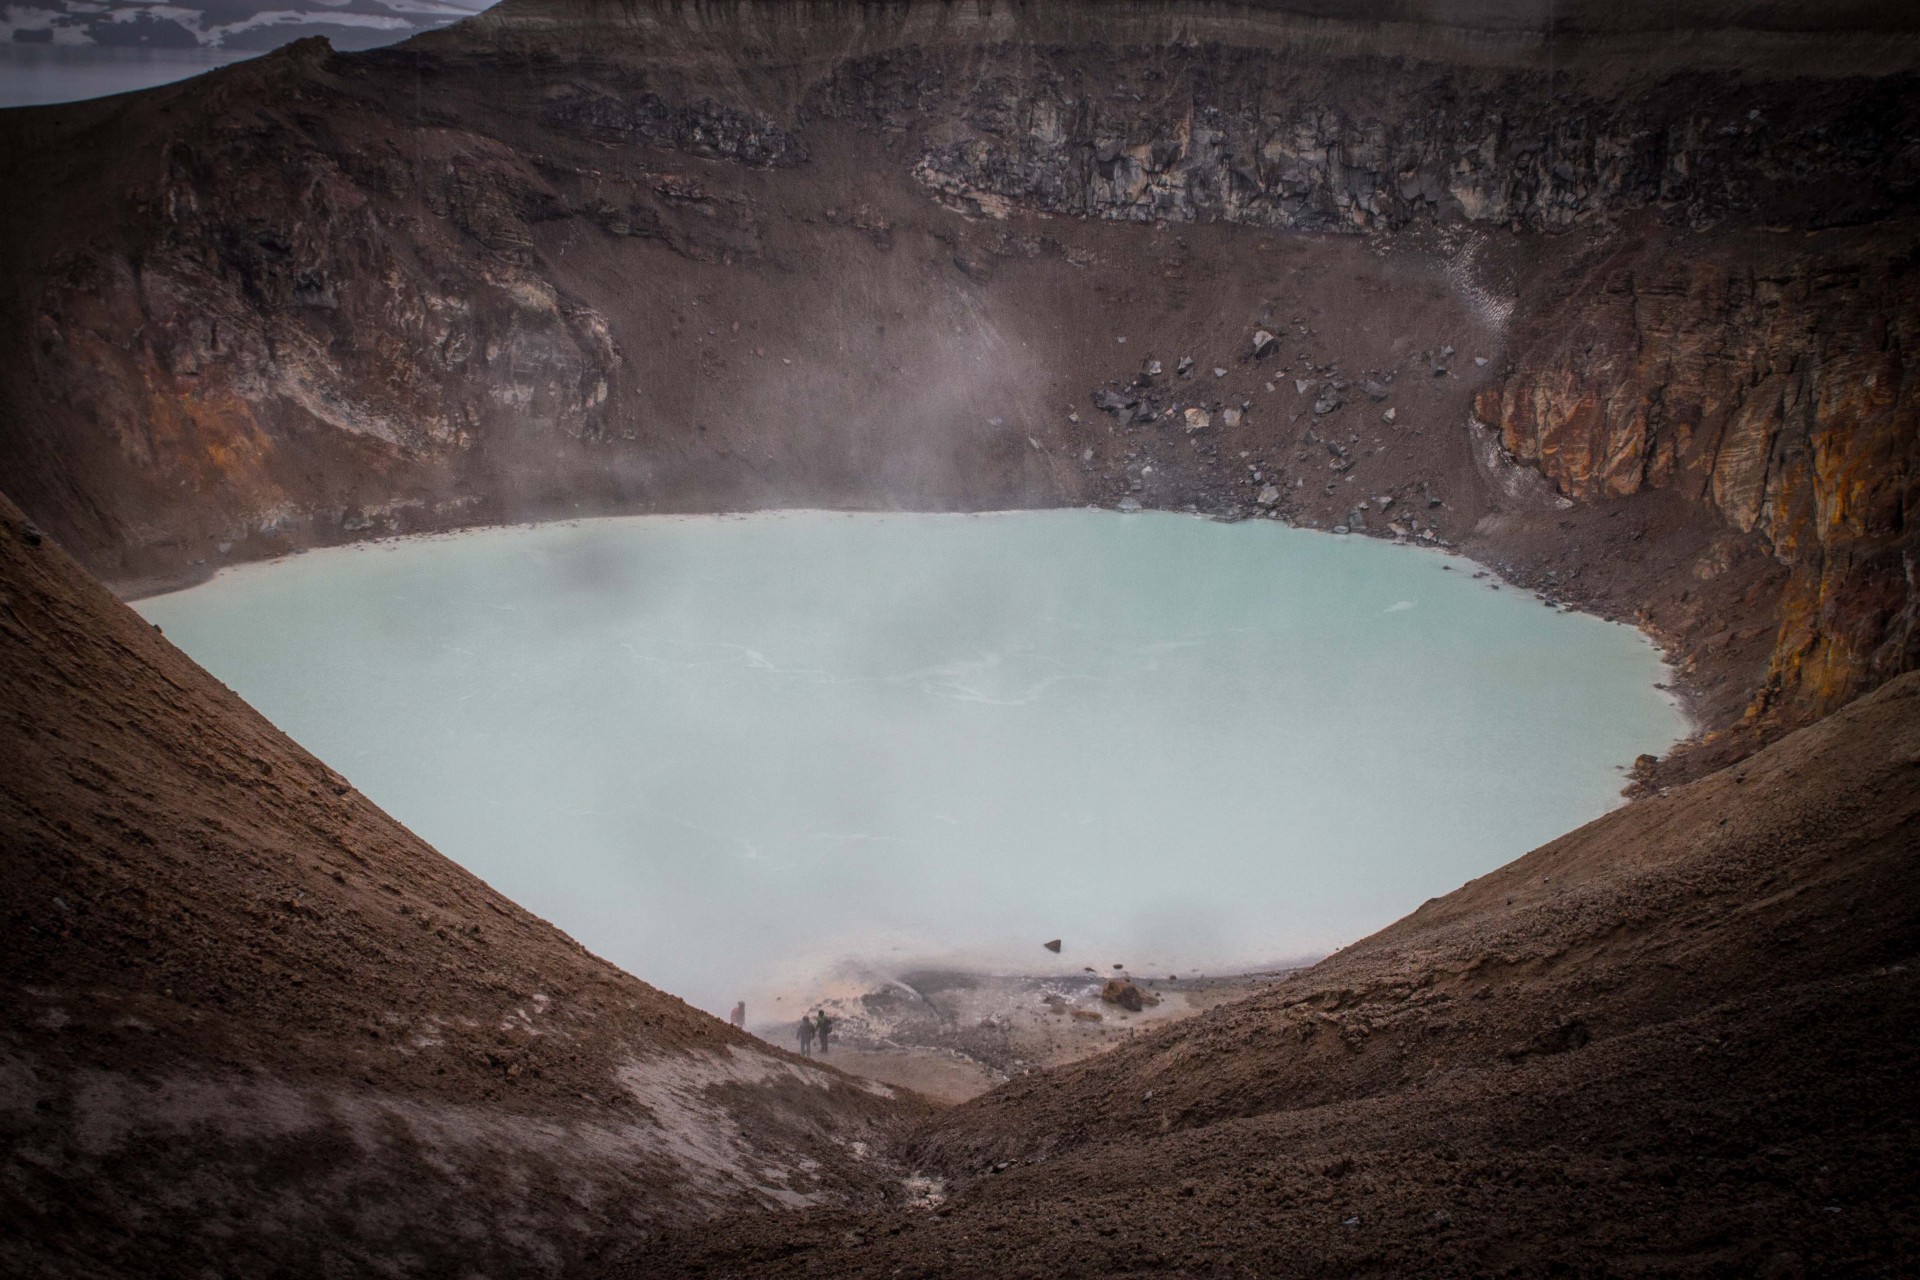 The milky white waters of the Viti Crater in the Askja Caldera of Iceland - Icelandic Highlands